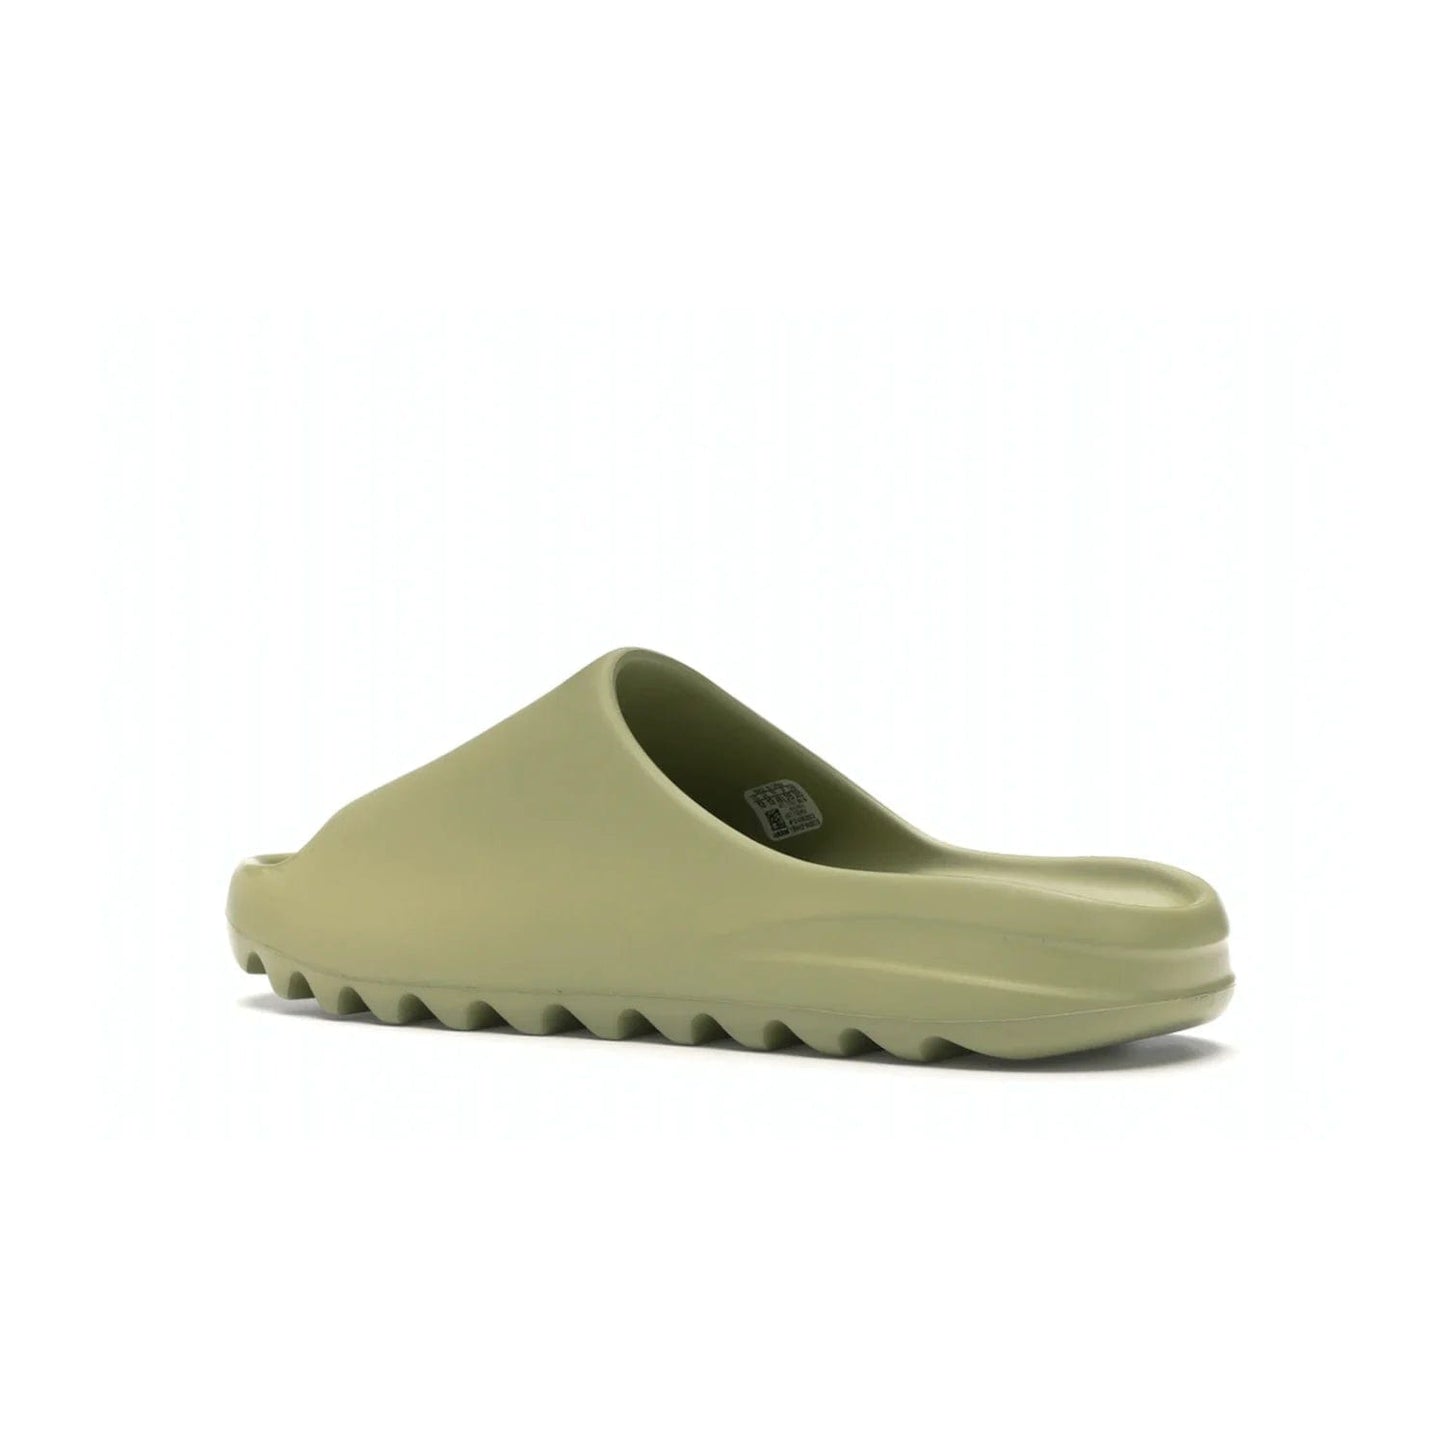 adidas Yeezy Slide Resin (2019/2021) - Image 23 - Only at www.BallersClubKickz.com - Step into fashion and function with the adidas Yeezy Slide Resin. Featuring a lightweight Resin EVA foam construction and an outsole with accentuated grooves for traction and support. The latest release is available in a Resin/Resin/Resin colorway, combining modern aesthetics and classic style. Step into style with the adidas Yeezy Slide Resin and be the trend-setter this season.